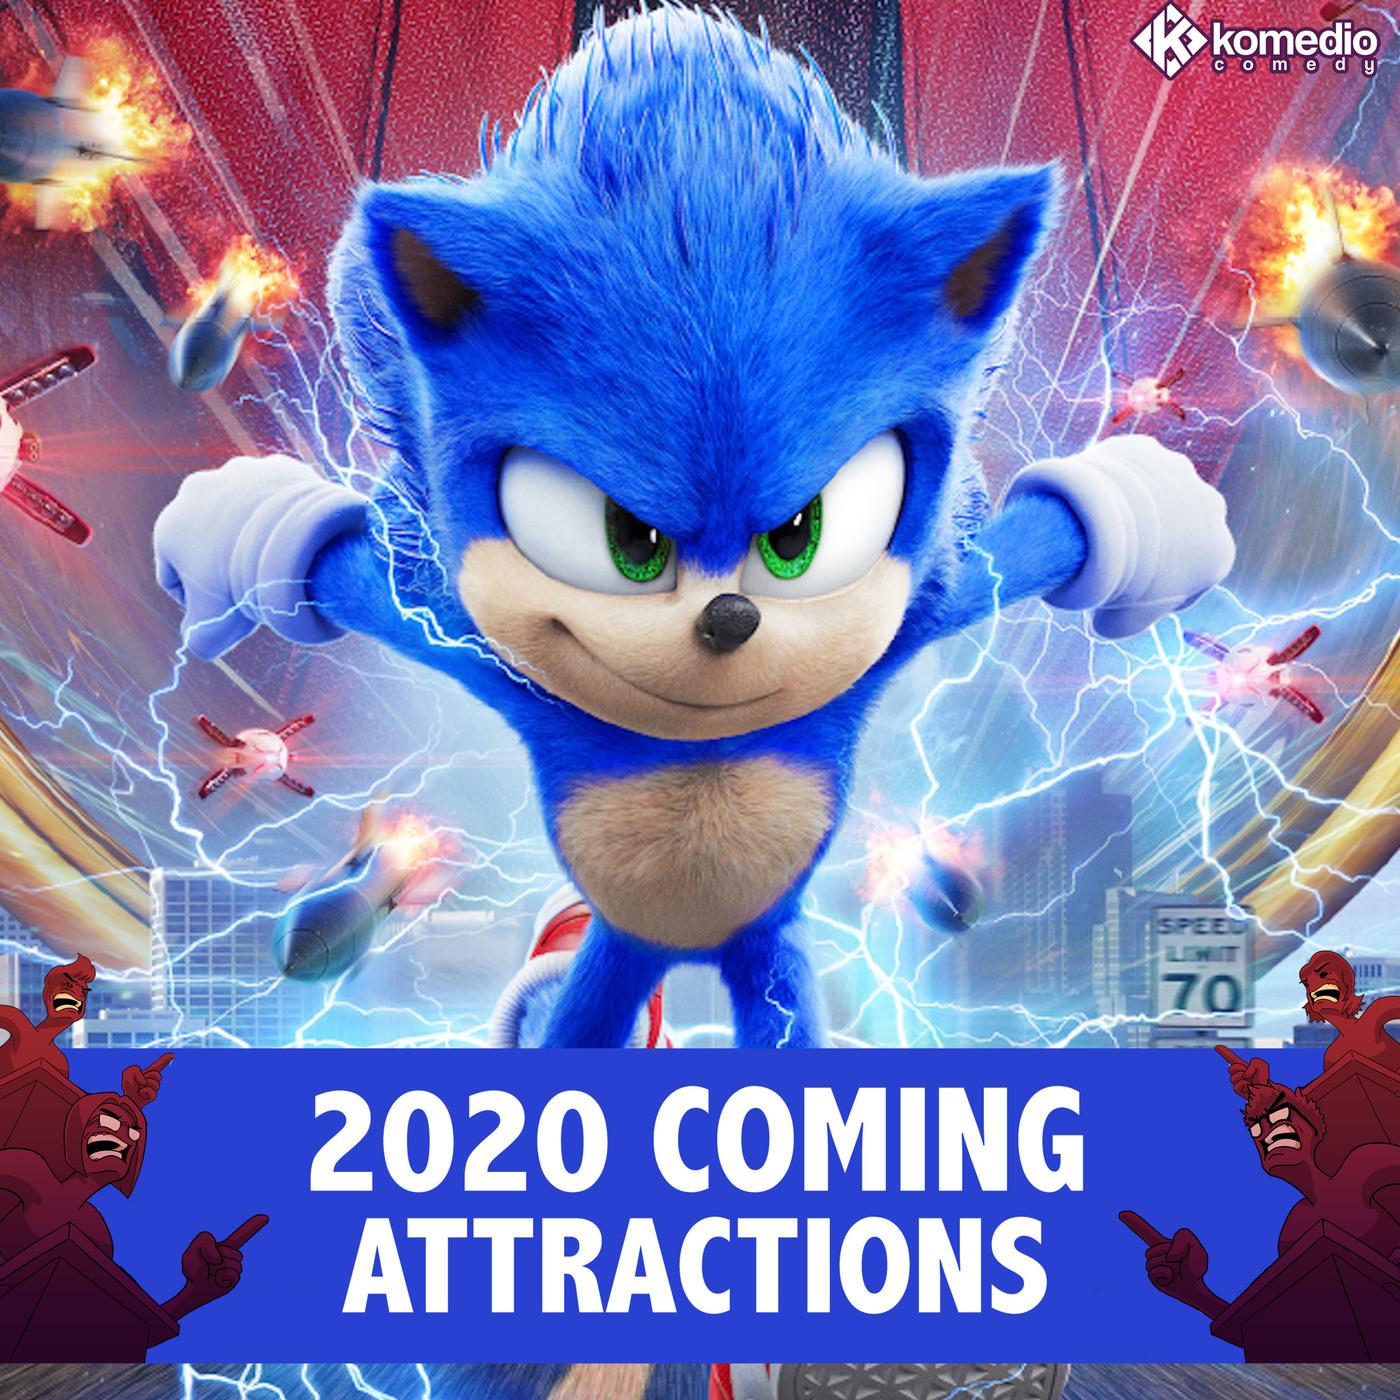 2020's Coming Attractions!